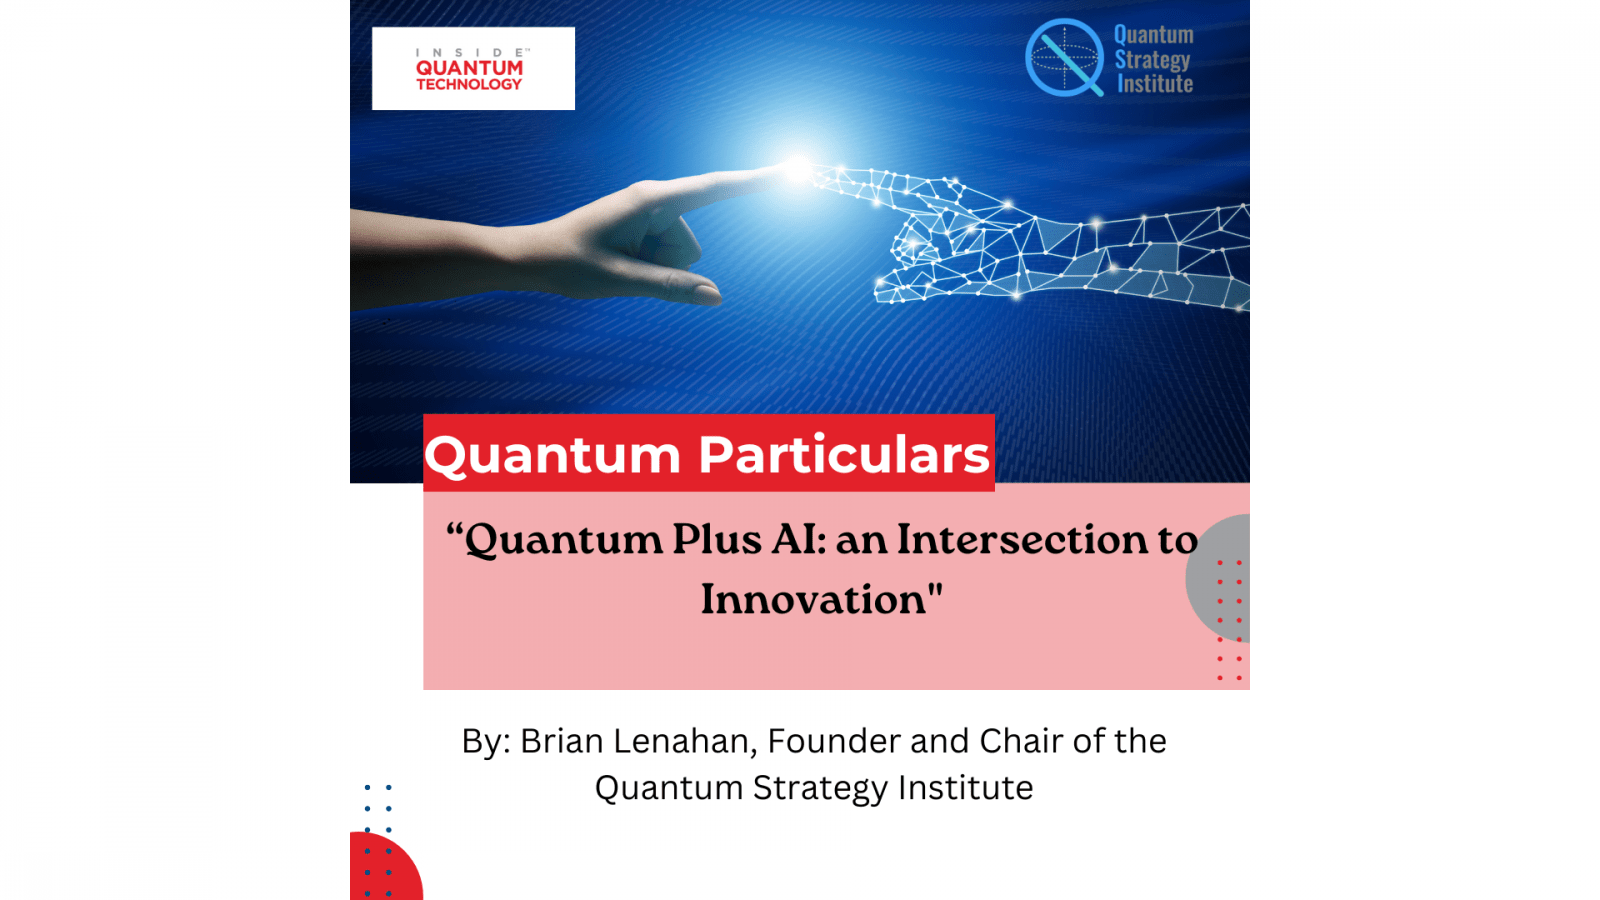 In a new guest article, Quantum Strategy Institute Founder and Chair Brian Lenahan discusses the intersection between AI and quantum computing.